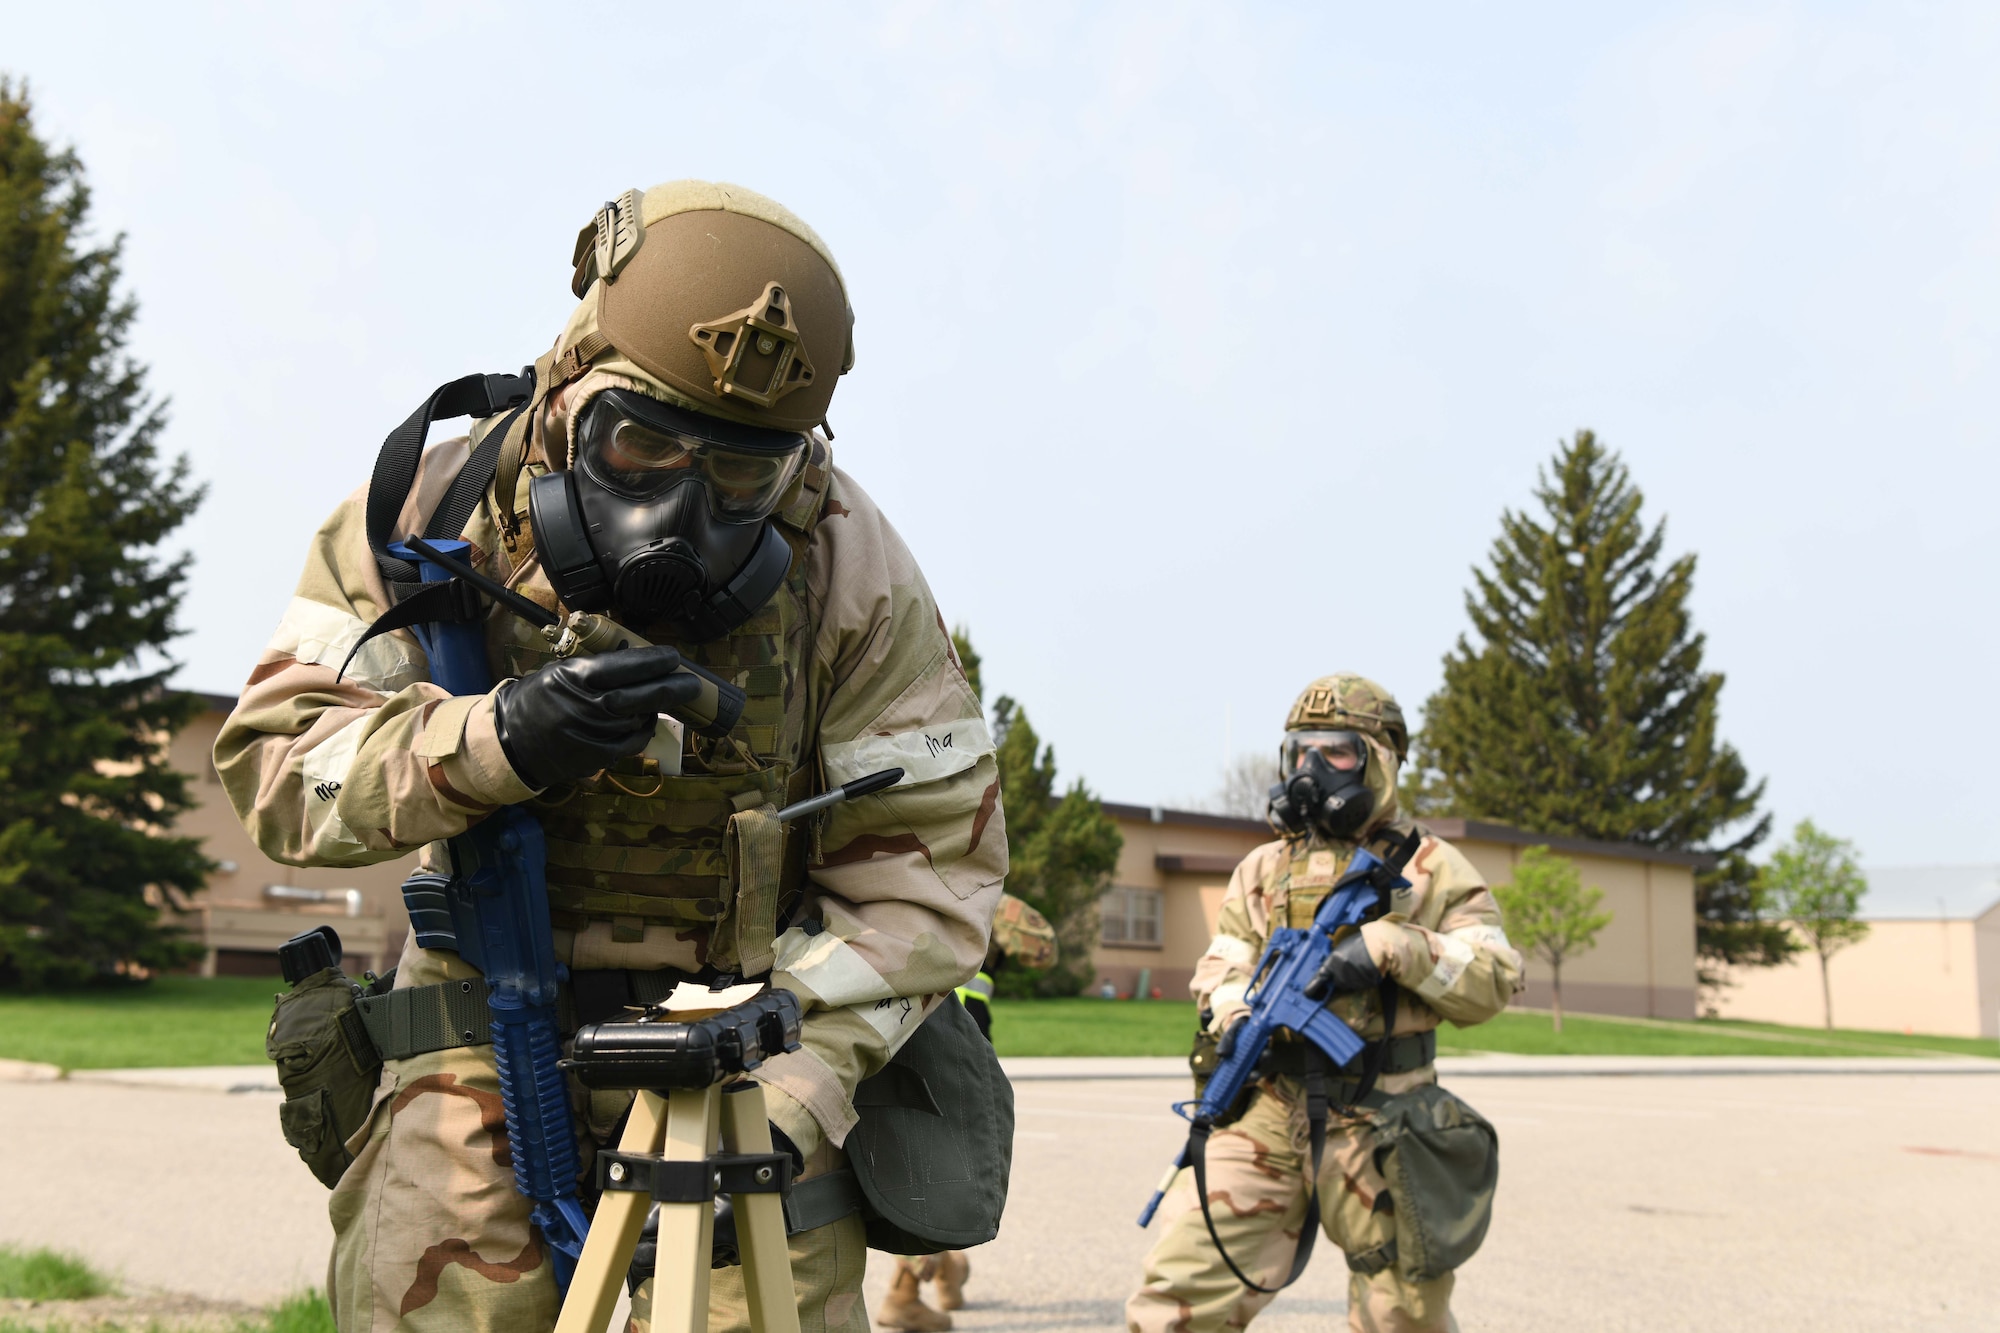 One airman in CBRN gear checks paper for chemical contamination while another airman in CBRN gear holds a blue training rifle.